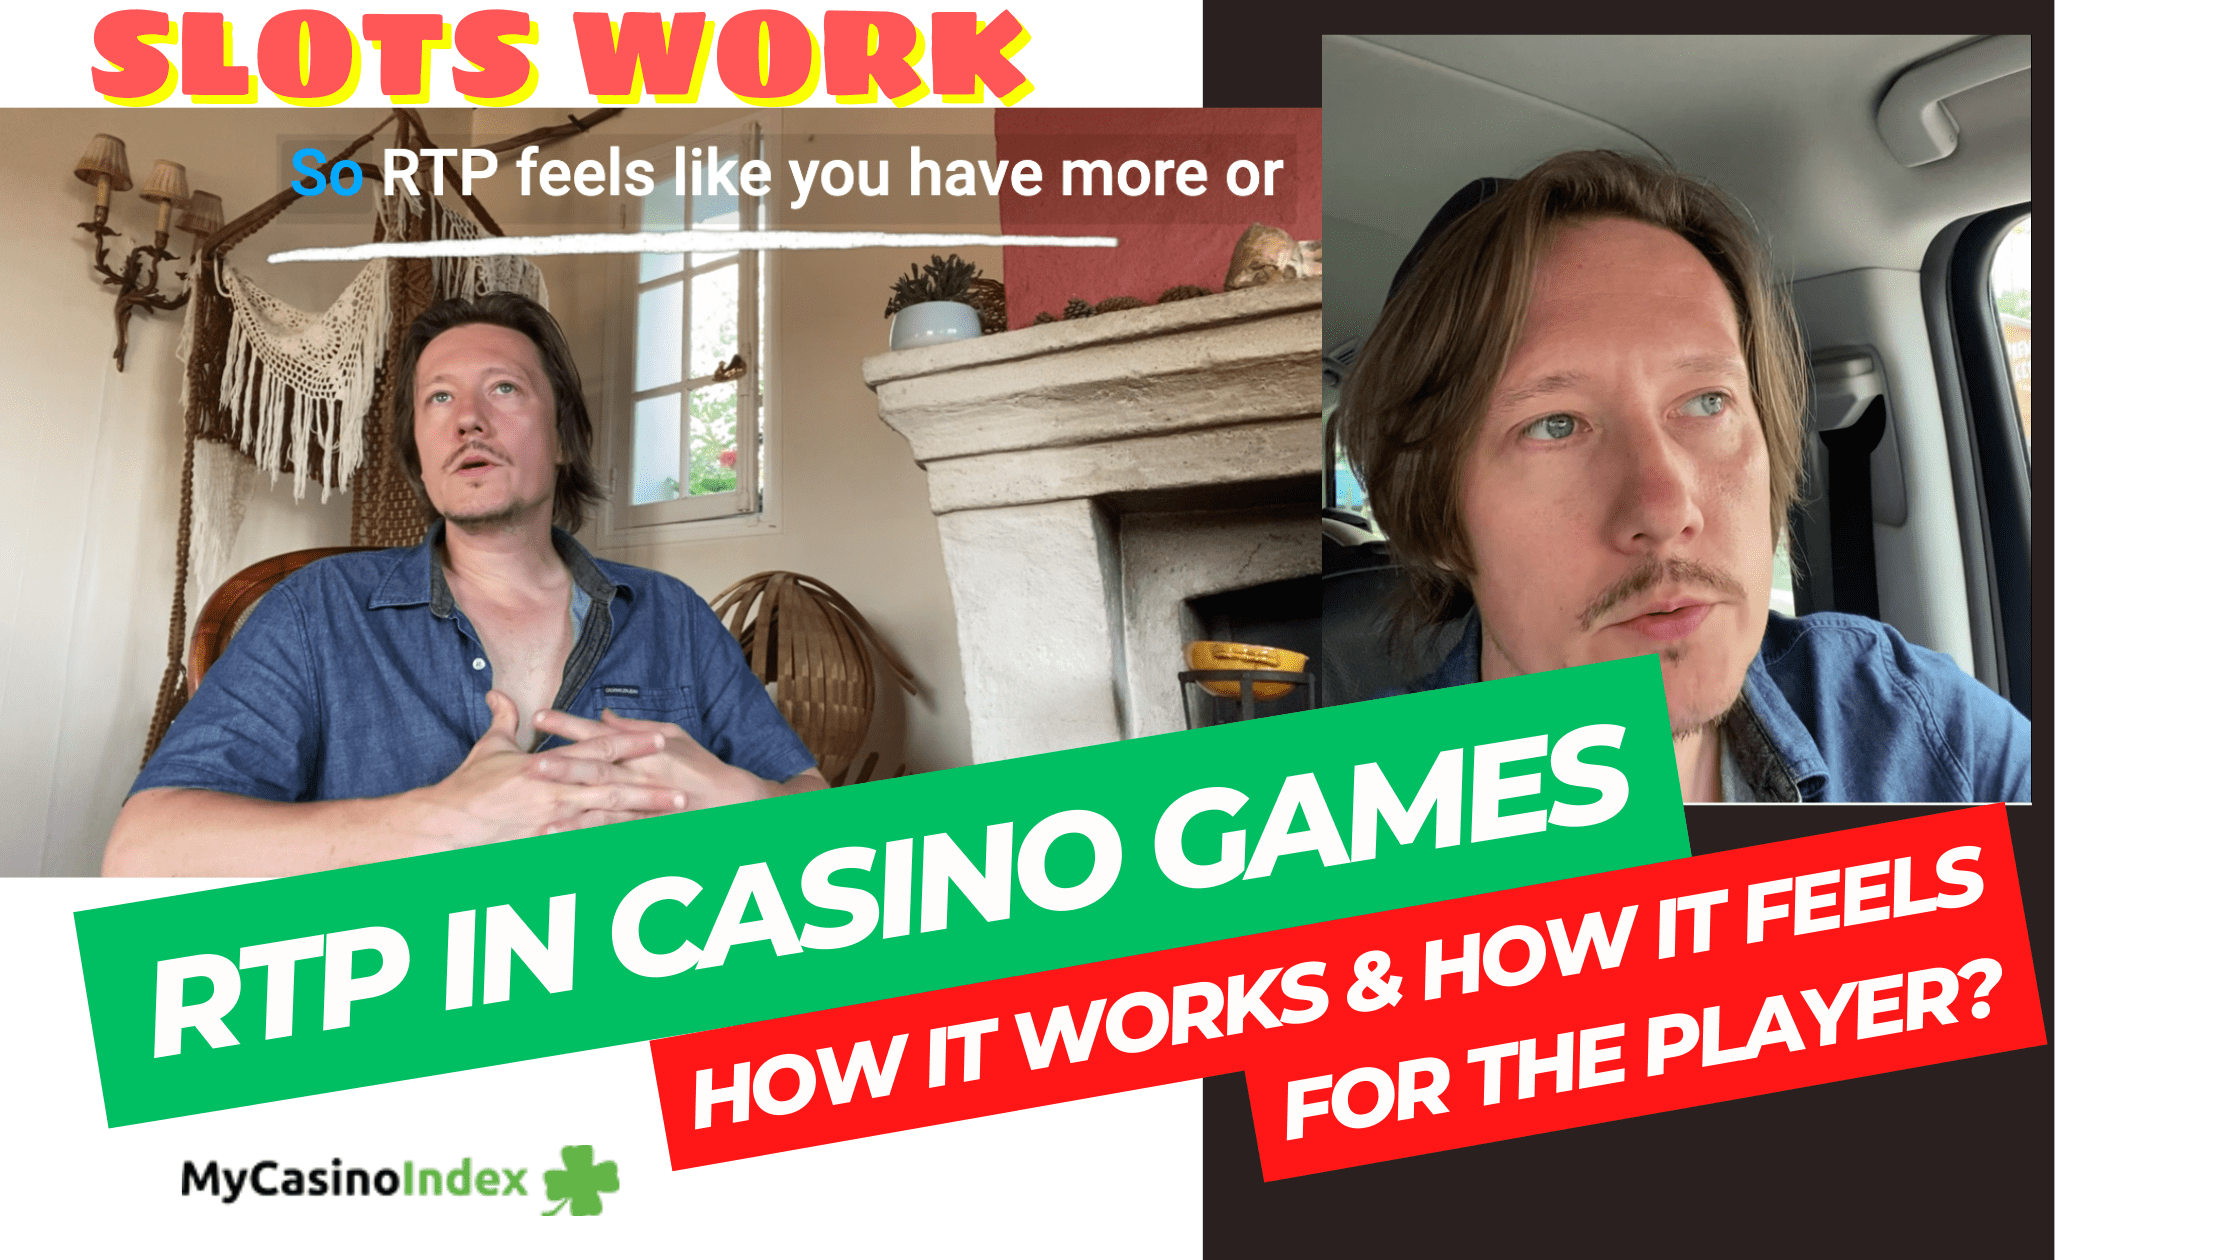 RTP in casino games: how it works and how it feels for the player?